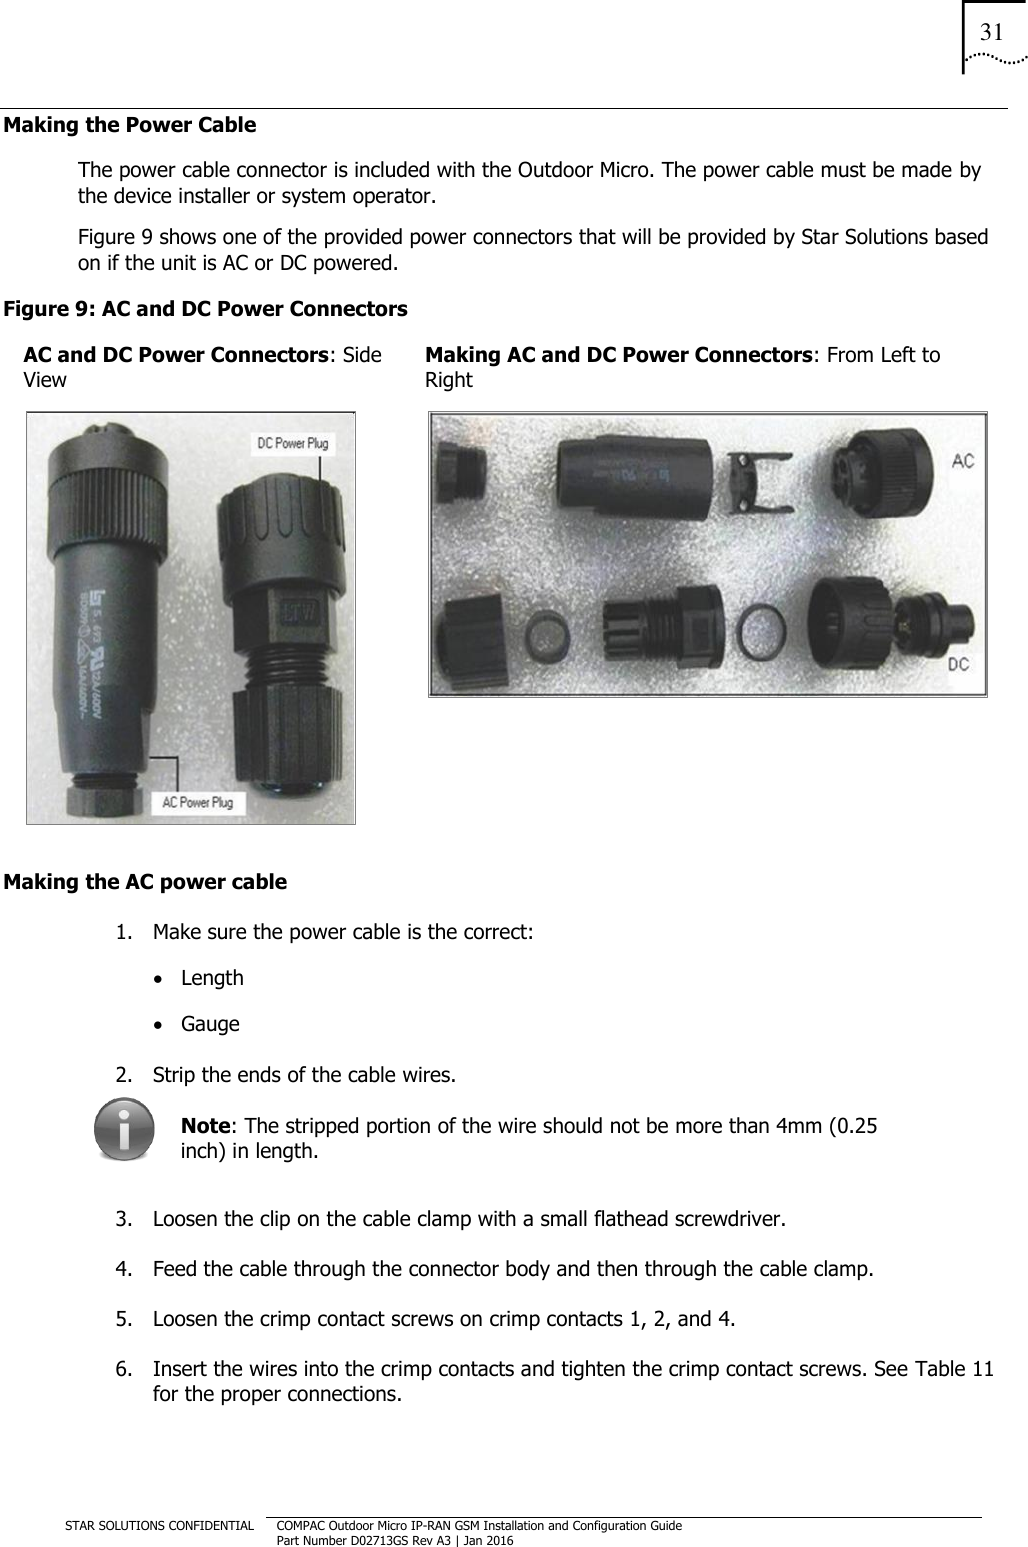 31  STAR SOLUTIONS CONFIDENTIAL COMPAC Outdoor Micro IP-RAN GSM Installation and Configuration Guide Part Number D02713GS Rev A3 | Jan 2016  Making the Power Cable  The power cable connector is included with the Outdoor Micro. The power cable must be made by the device installer or system operator. Figure 9 shows one of the provided power connectors that will be provided by Star Solutions based on if the unit is AC or DC powered. Figure 9: AC and DC Power Connectors AC and DC Power Connectors: Side View Making AC and DC Power Connectors: From Left to Right   Making the AC power cable 1. Make sure the power cable is the correct:  Length  Gauge 2. Strip the ends of the cable wires.  Note: The stripped portion of the wire should not be more than 4mm (0.25 inch) in length. 3. Loosen the clip on the cable clamp with a small flathead screwdriver. 4. Feed the cable through the connector body and then through the cable clamp. 5. Loosen the crimp contact screws on crimp contacts 1, 2, and 4. 6. Insert the wires into the crimp contacts and tighten the crimp contact screws. See Table 11 for the proper connections.   